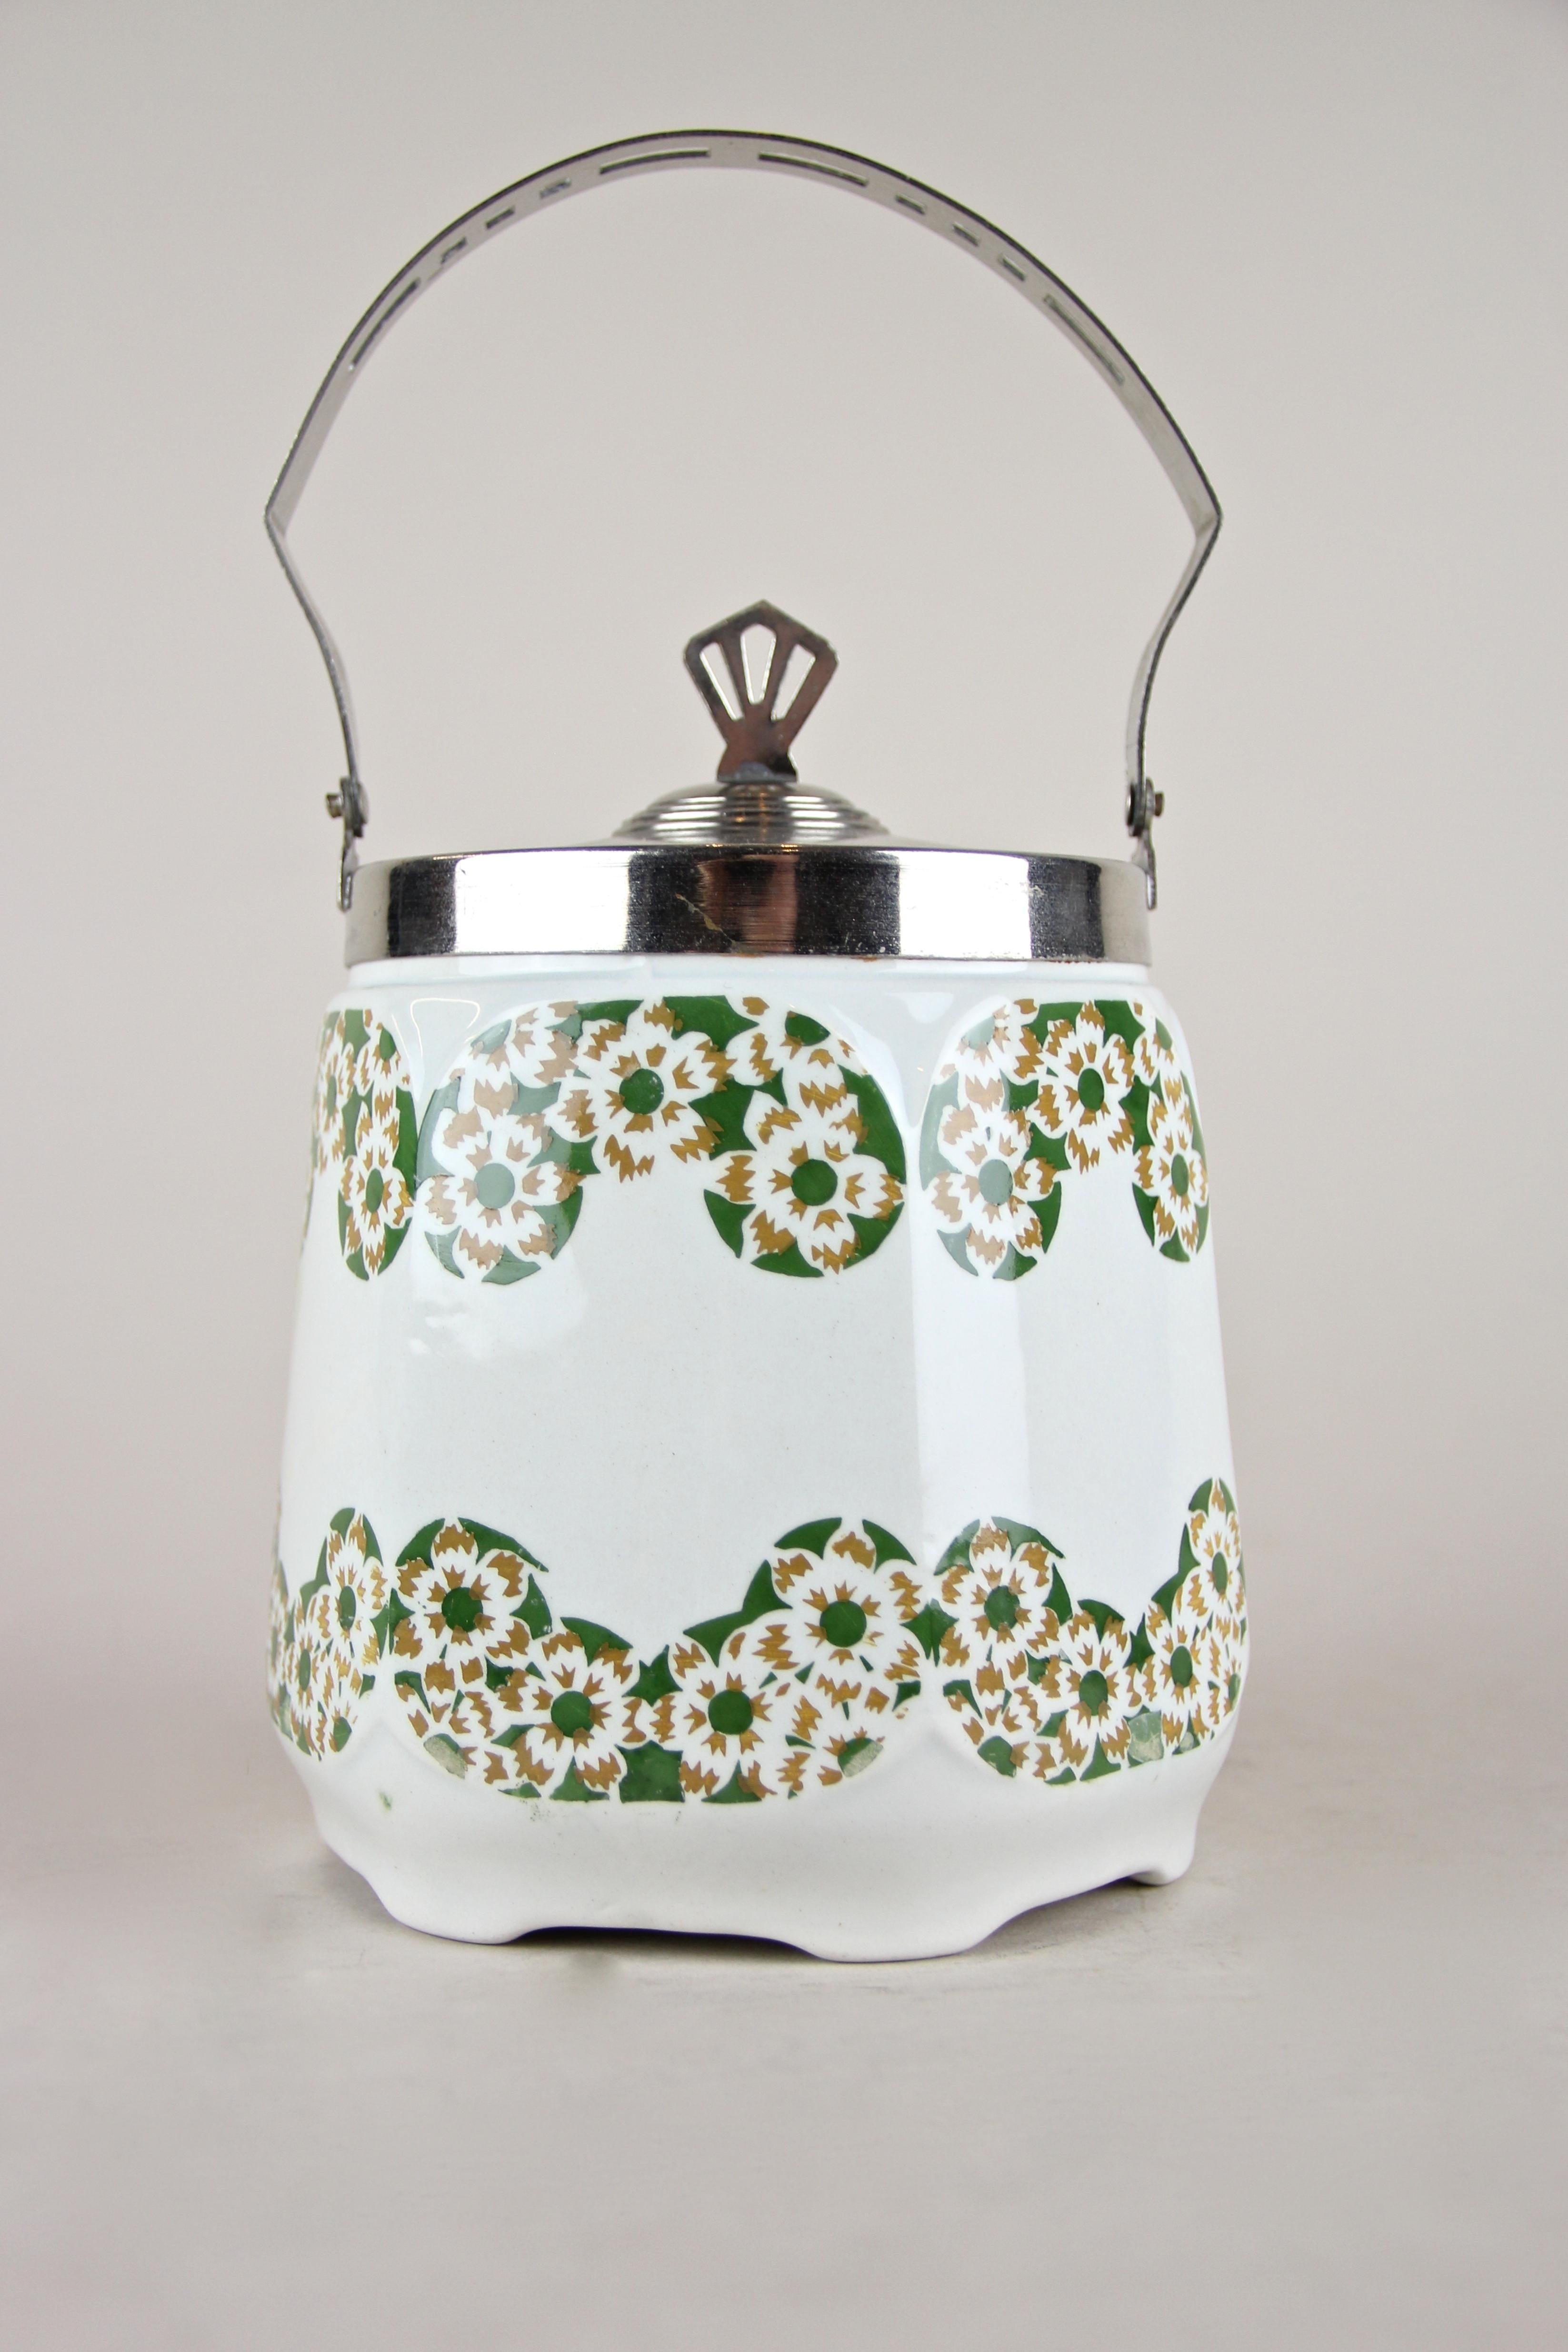 Lovely Art Nouveau lidded ceramic jar from Austria, circa 1915. This piece from the early 20th century shows a beautiful cherry blossom design in green and light brown. A nice chromed mounting with perforated handle and a great designed lid makes